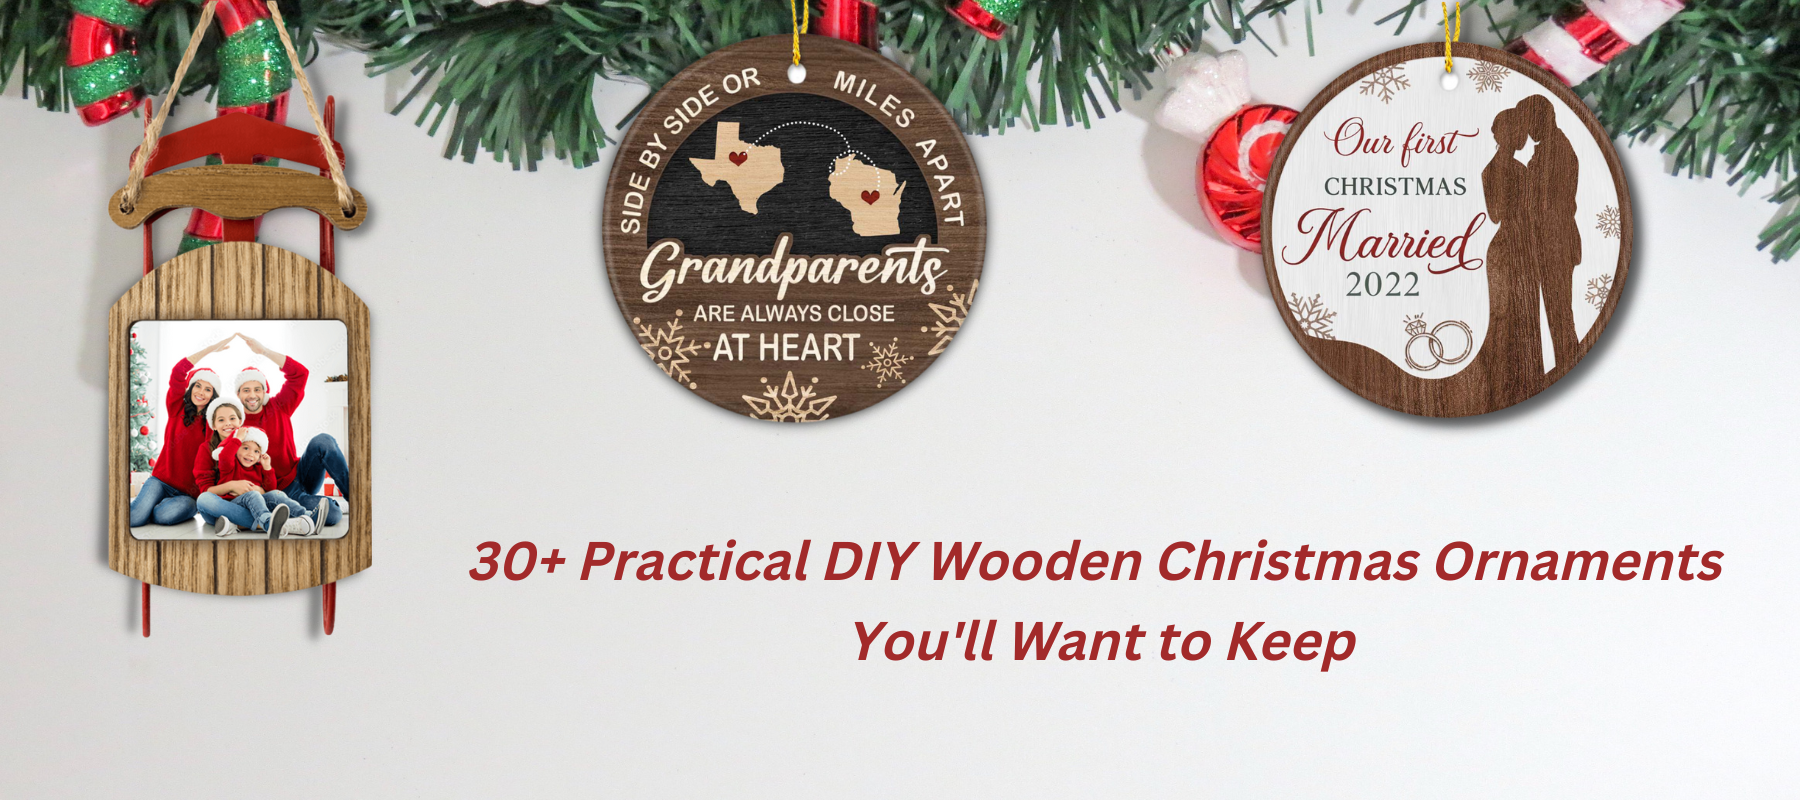 25+ Practical DIY Wooden Christmas Ornaments You'll Want to Keep